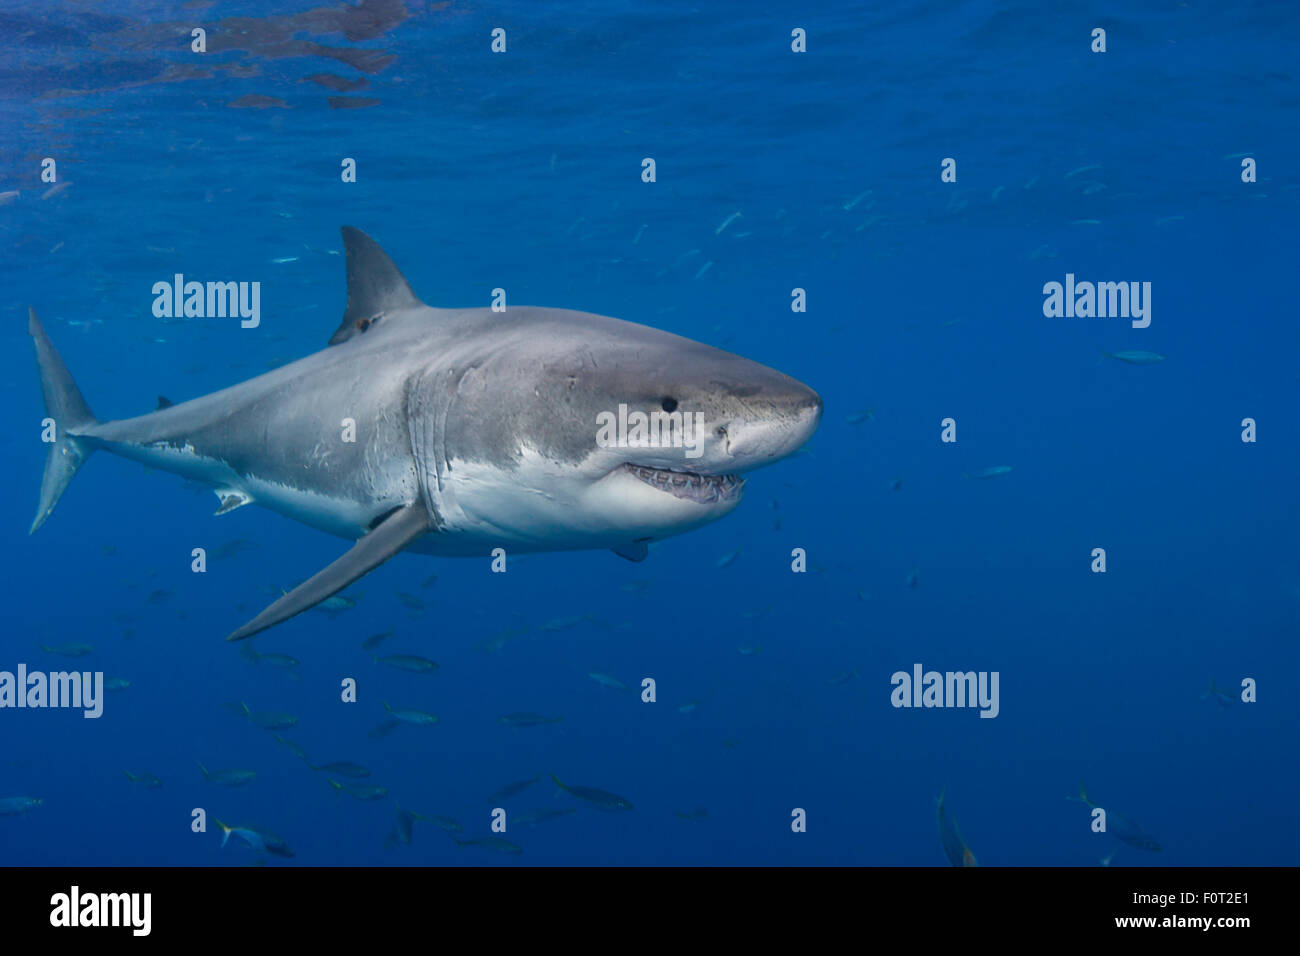 This great white shark, Carcharodon carcharias, was photographed off Guadalupe Island, Mexico. Stock Photo